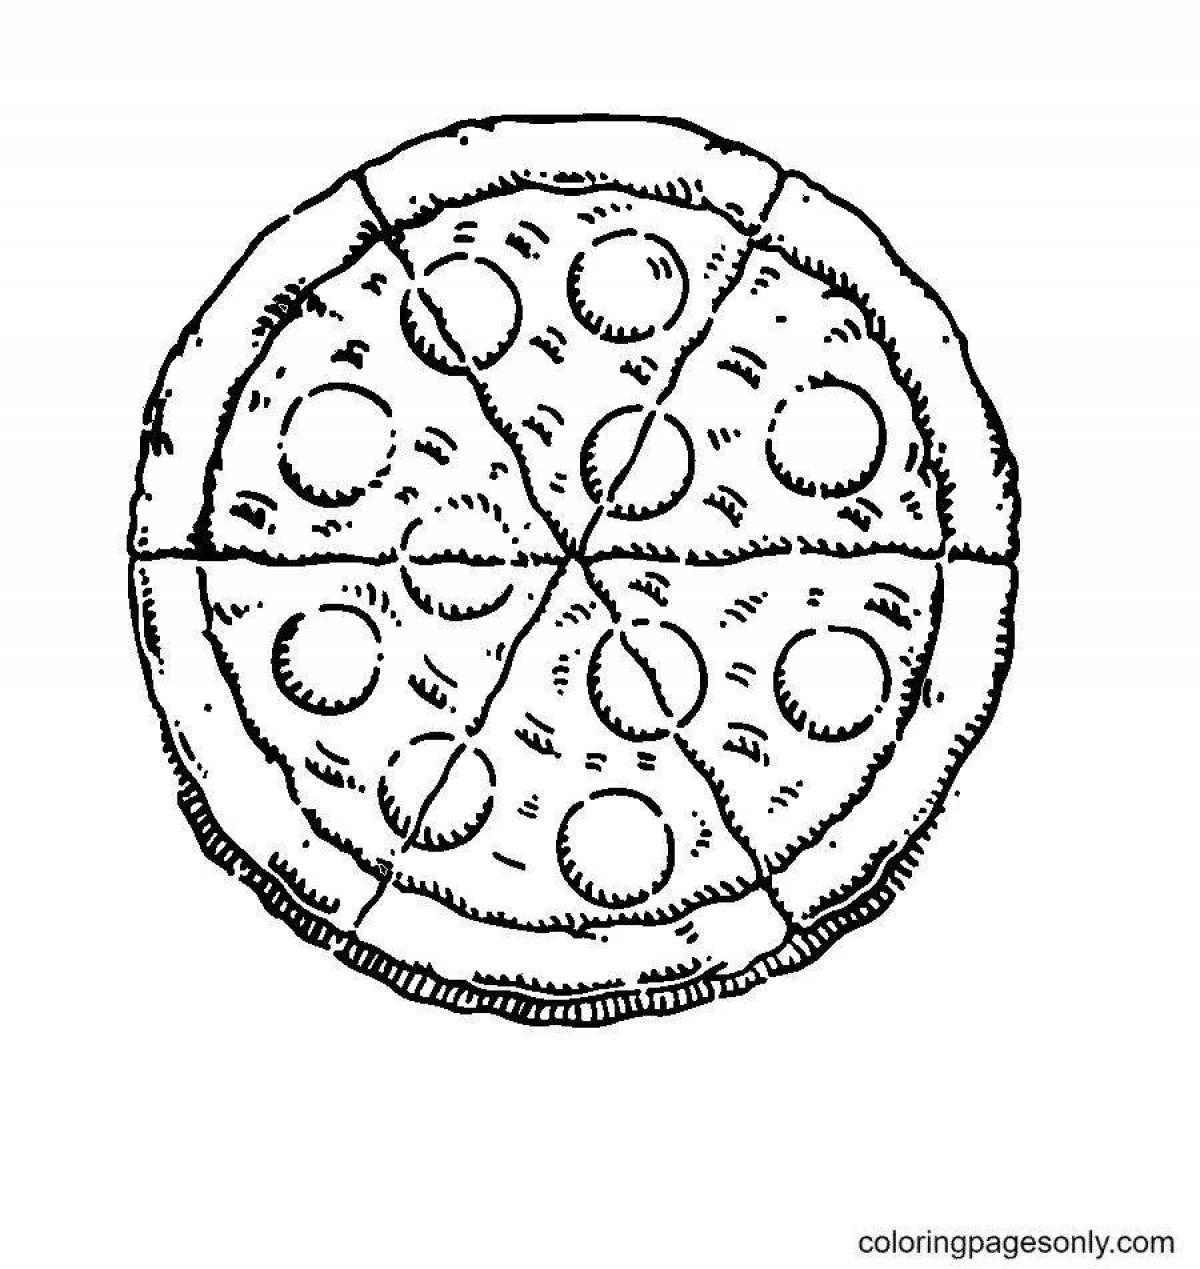 Exquisite pepperoni pizza coloring book